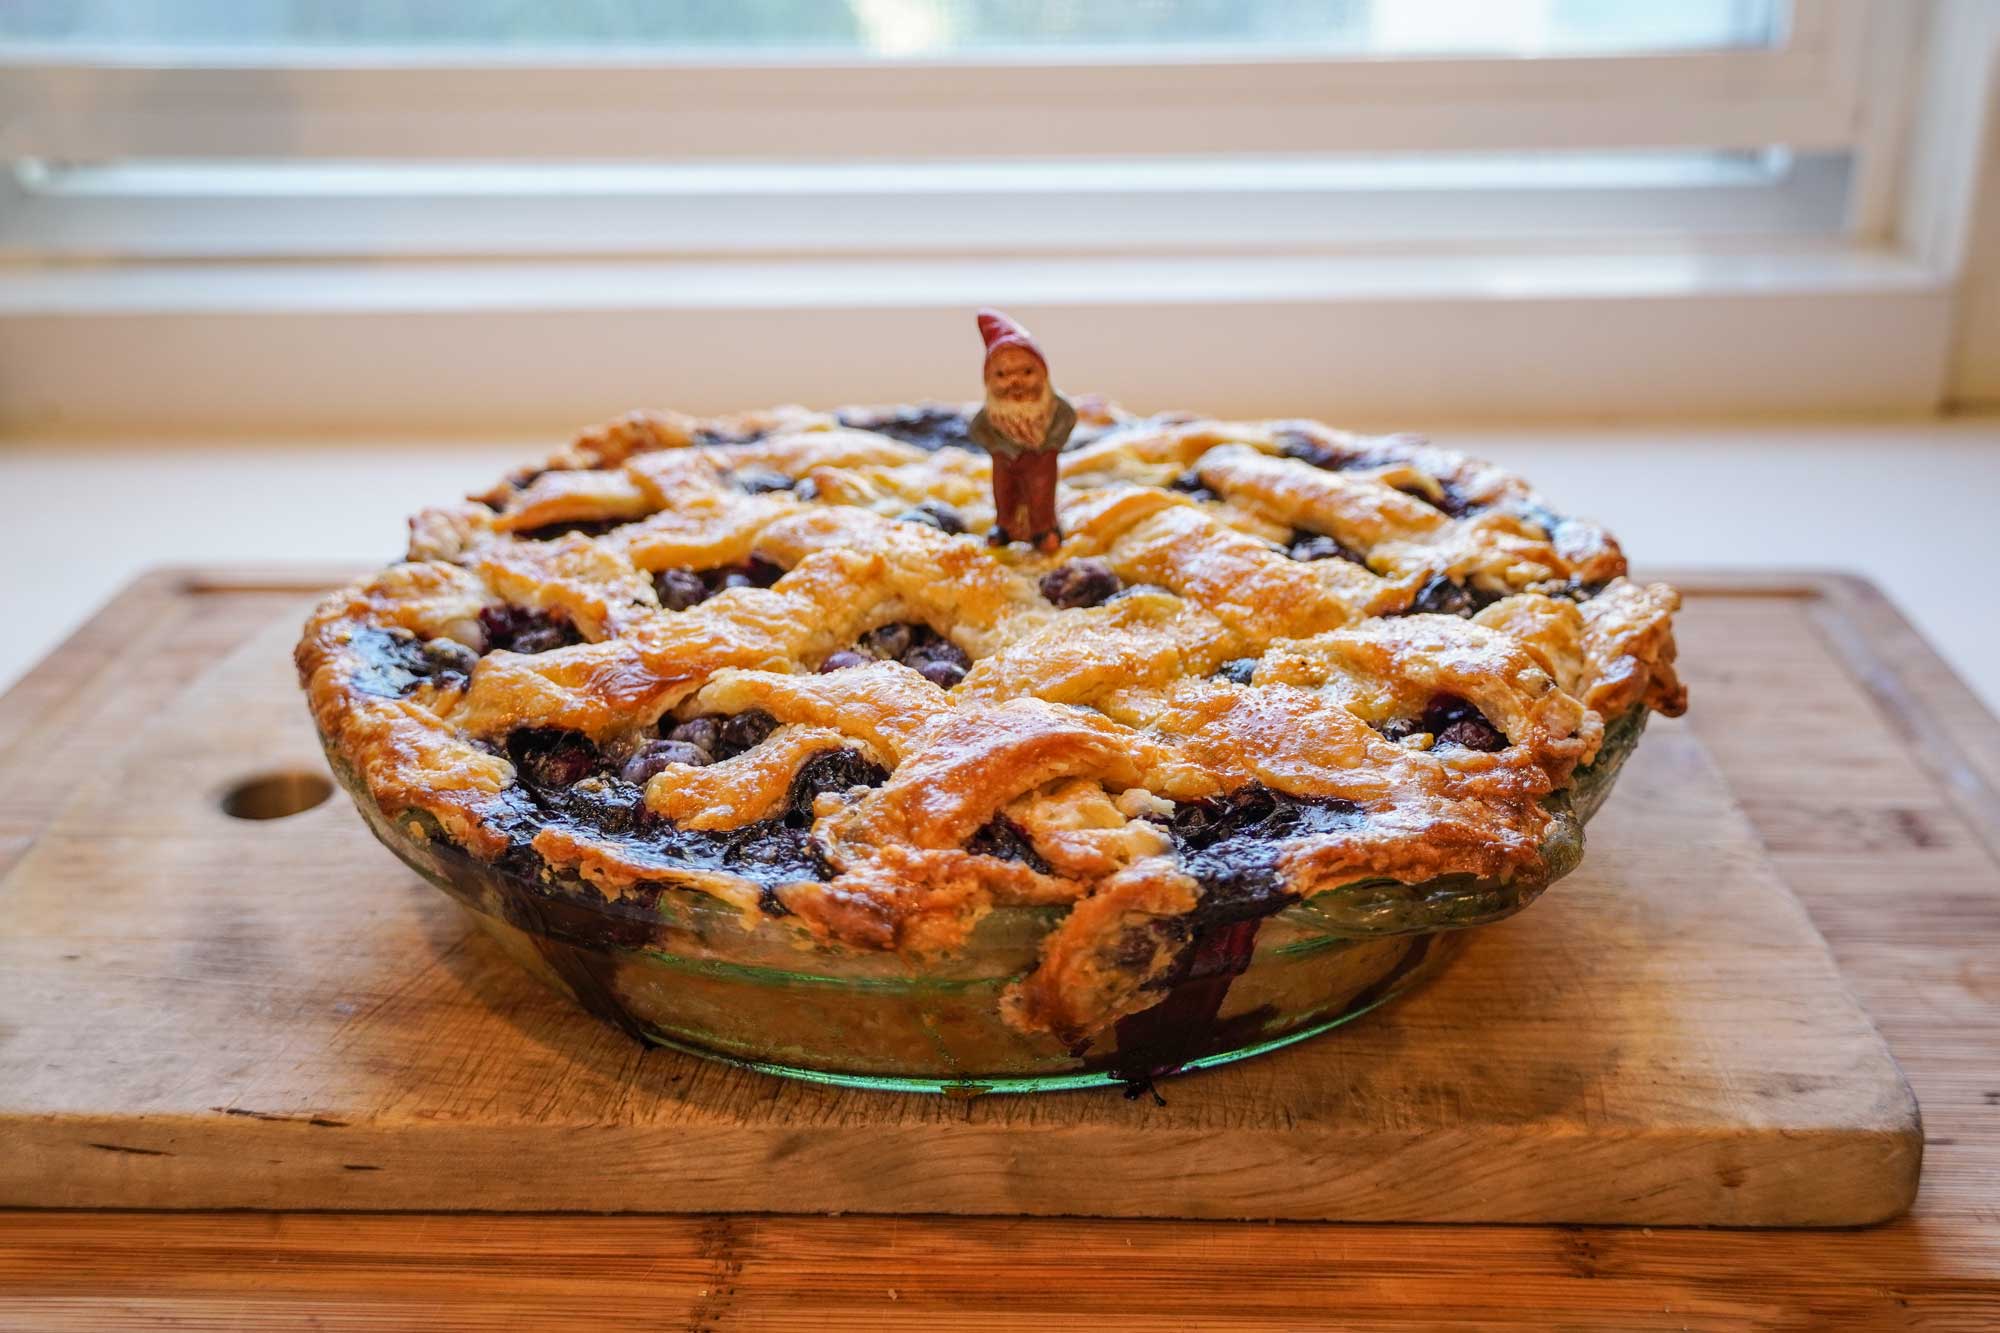 Photo of a blueberry pie with a garden gnome standing on top.